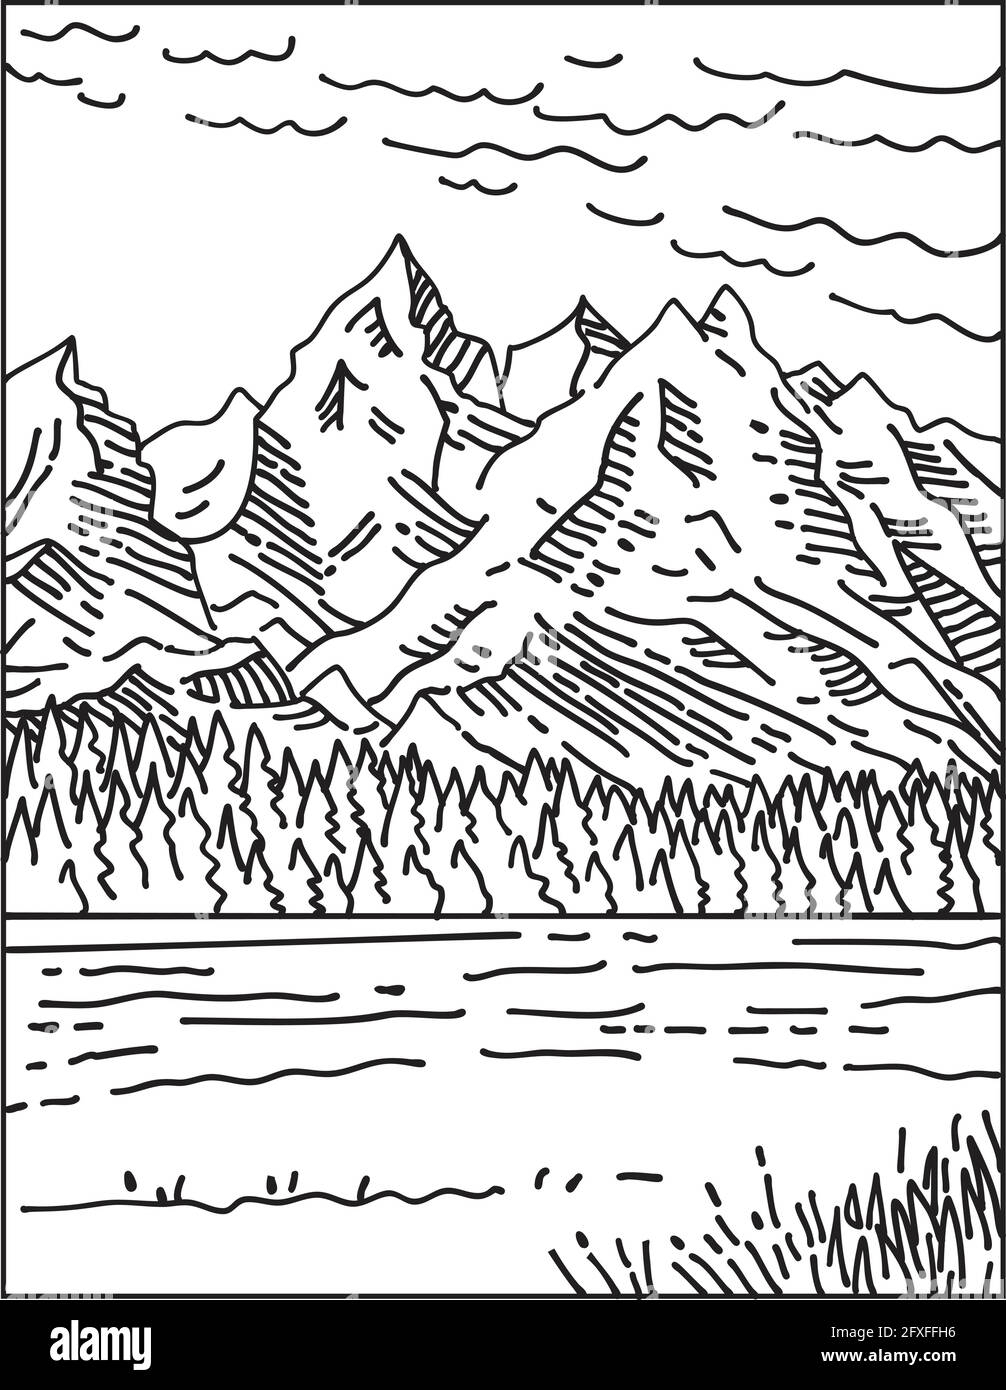 Mono line illustration of the Teton Range in Grand Teton National Park located in northwestern Wyoming, United States done in retro black and white mo Stock Vector